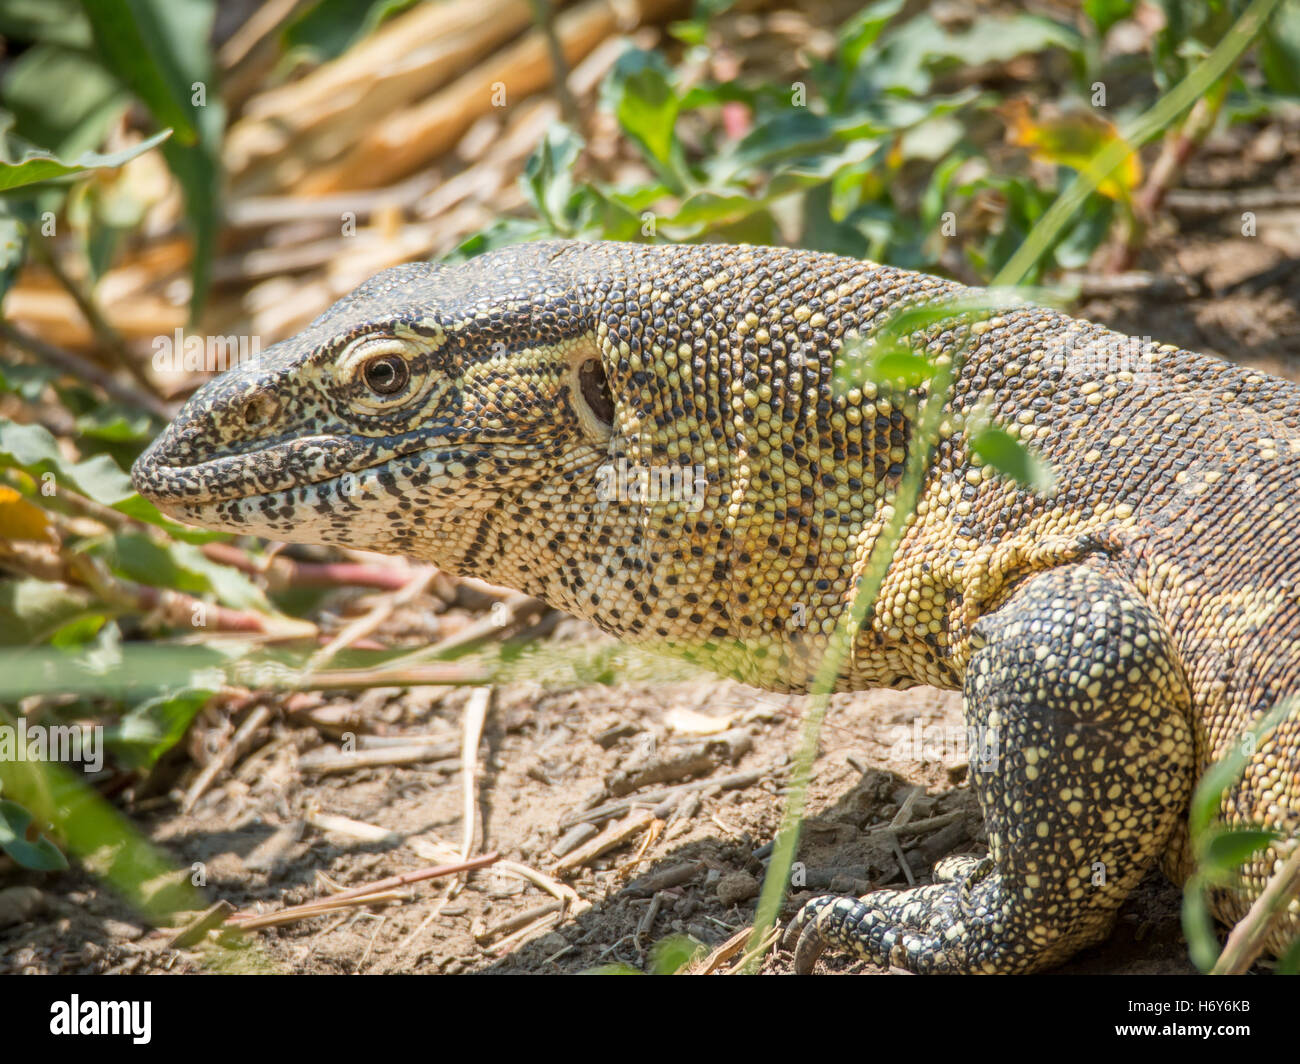 Portrait of a large colorful monitor lizard taken in the Caprivi Strip of Namibia. Stock Photo